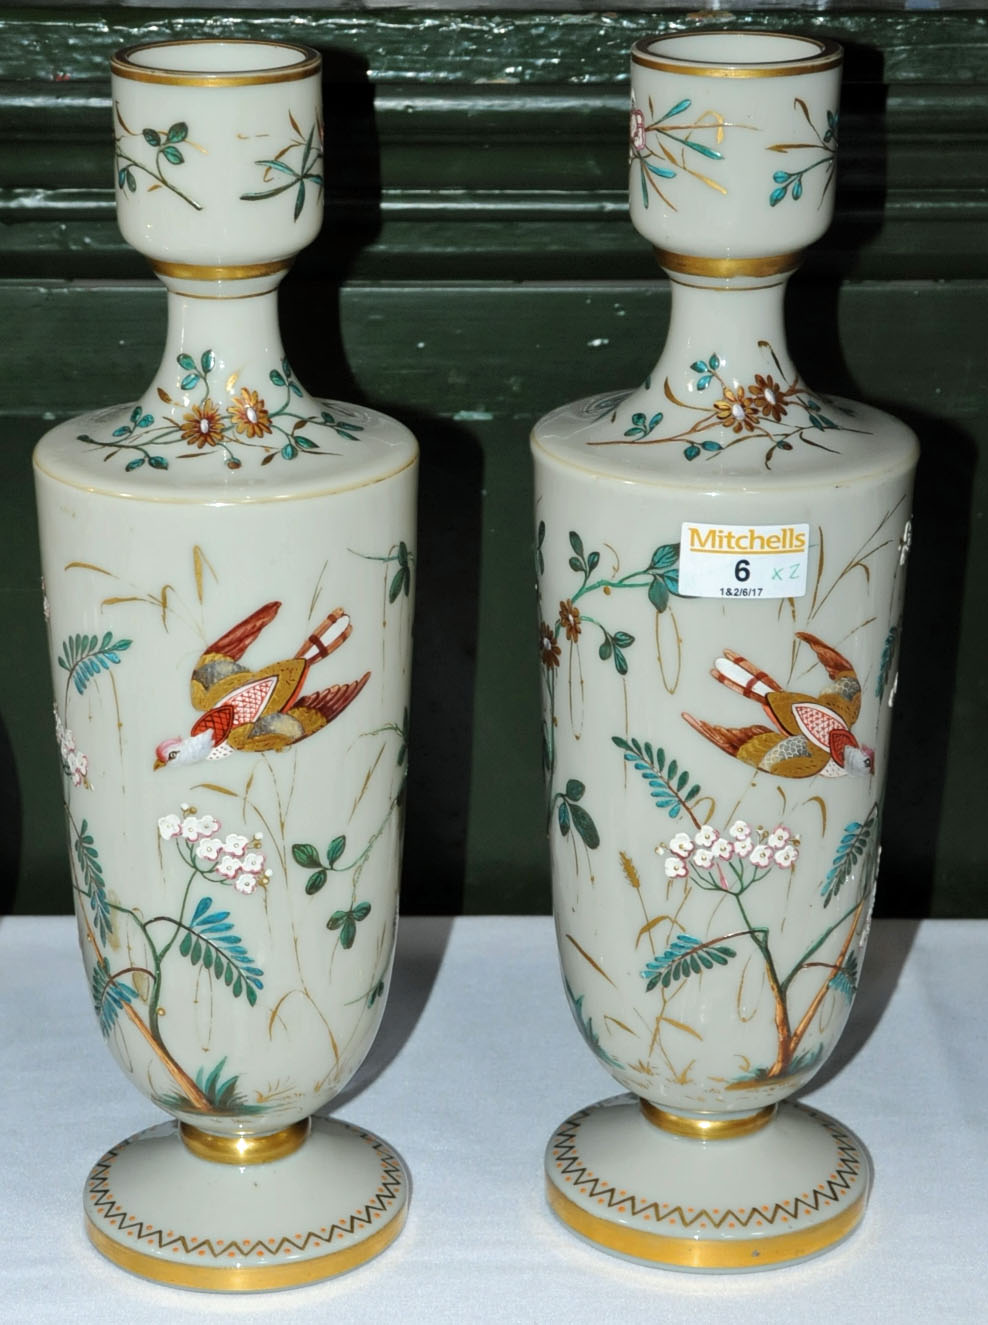 A pair of Victorian glass vases, decorated with birds and flowers. Height 34 cm (see illustration). - Image 2 of 3